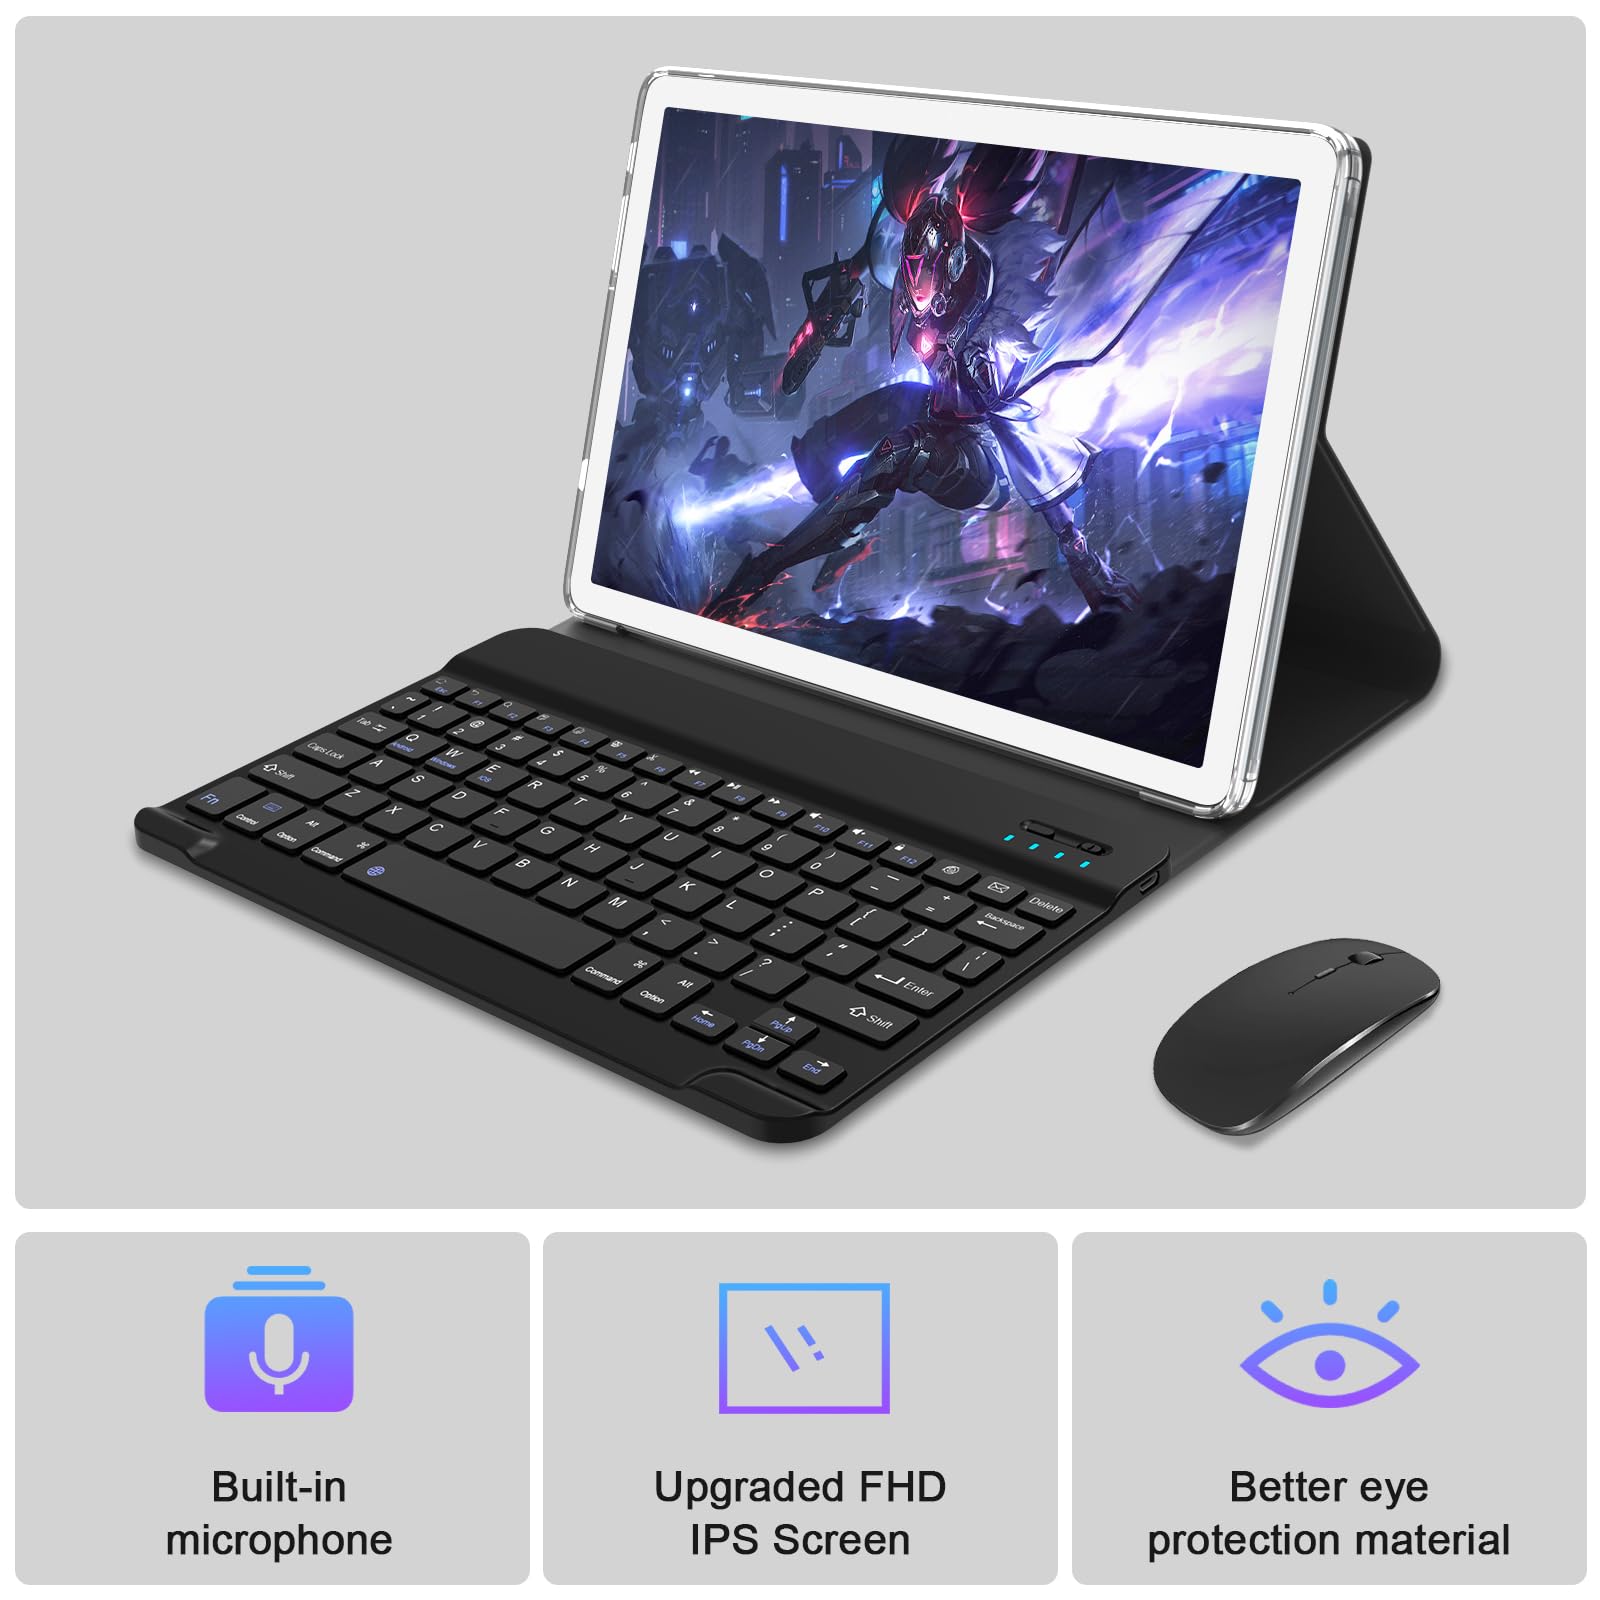 2023 Newest Tablet Android 12 Tablets 10 Inch, Tablet 128GB ROM+16GB RAM (8+8 Virtual), 2 In 1 Tablet with keyboard, Powerful Octa-Core+13MP Camera, 1TB TF Expandable, FHD IPS Display WiFi Tablet PC